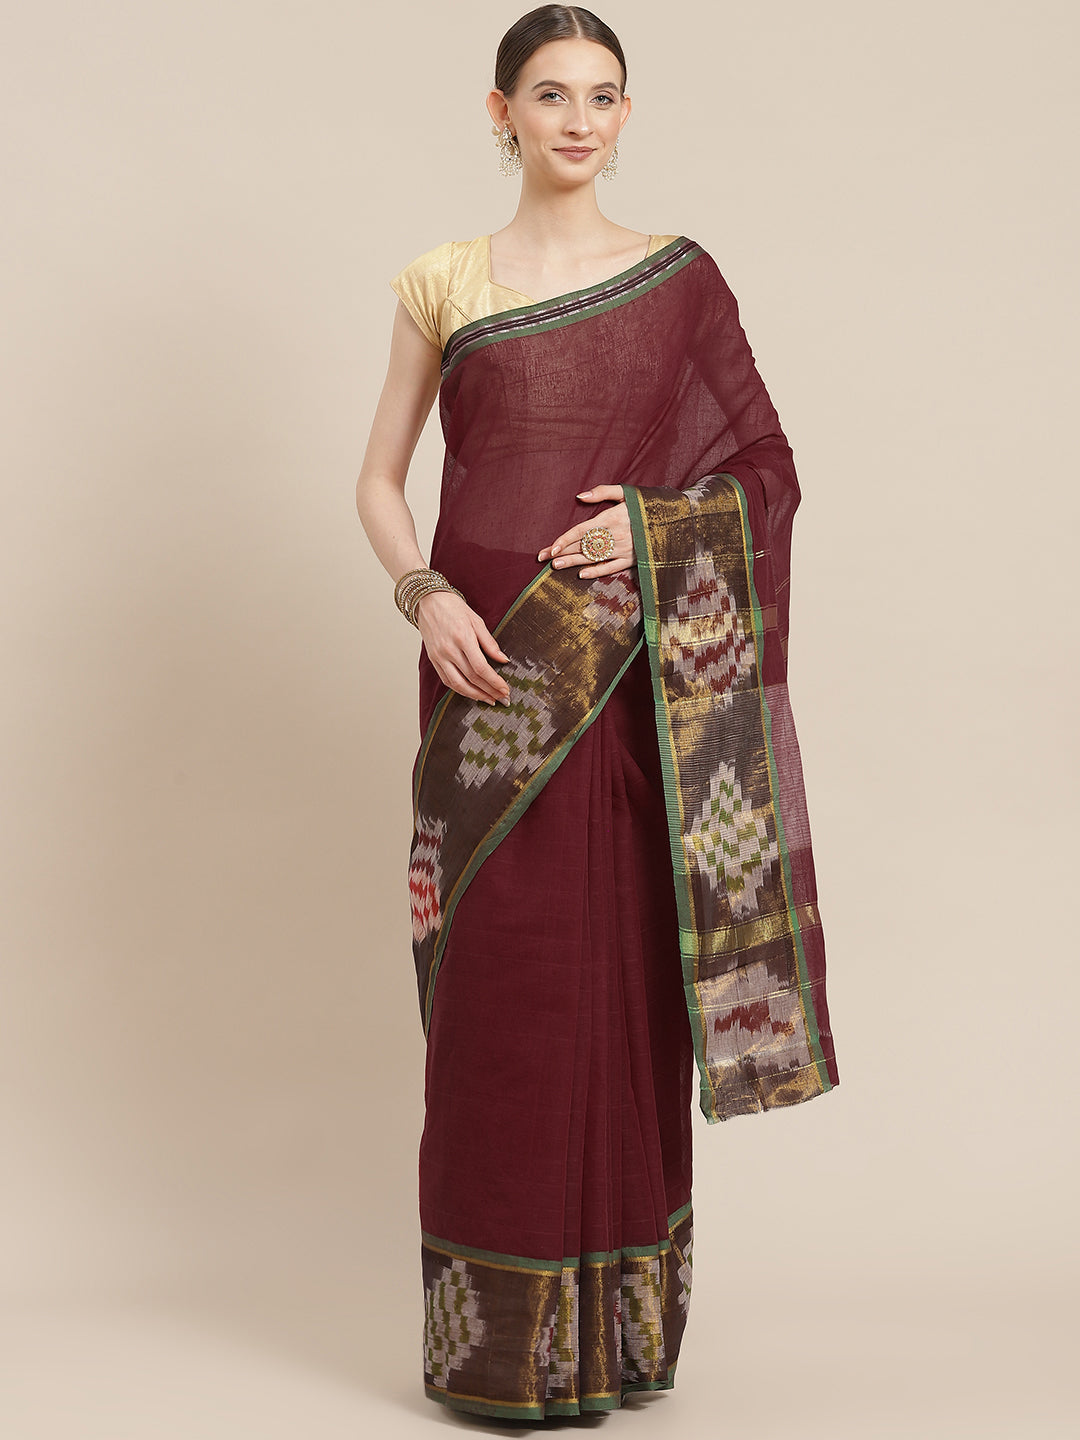 Ishin Women's Cotton Blend Maroon Solid Woven Pochampally Saree With Blouse Piece